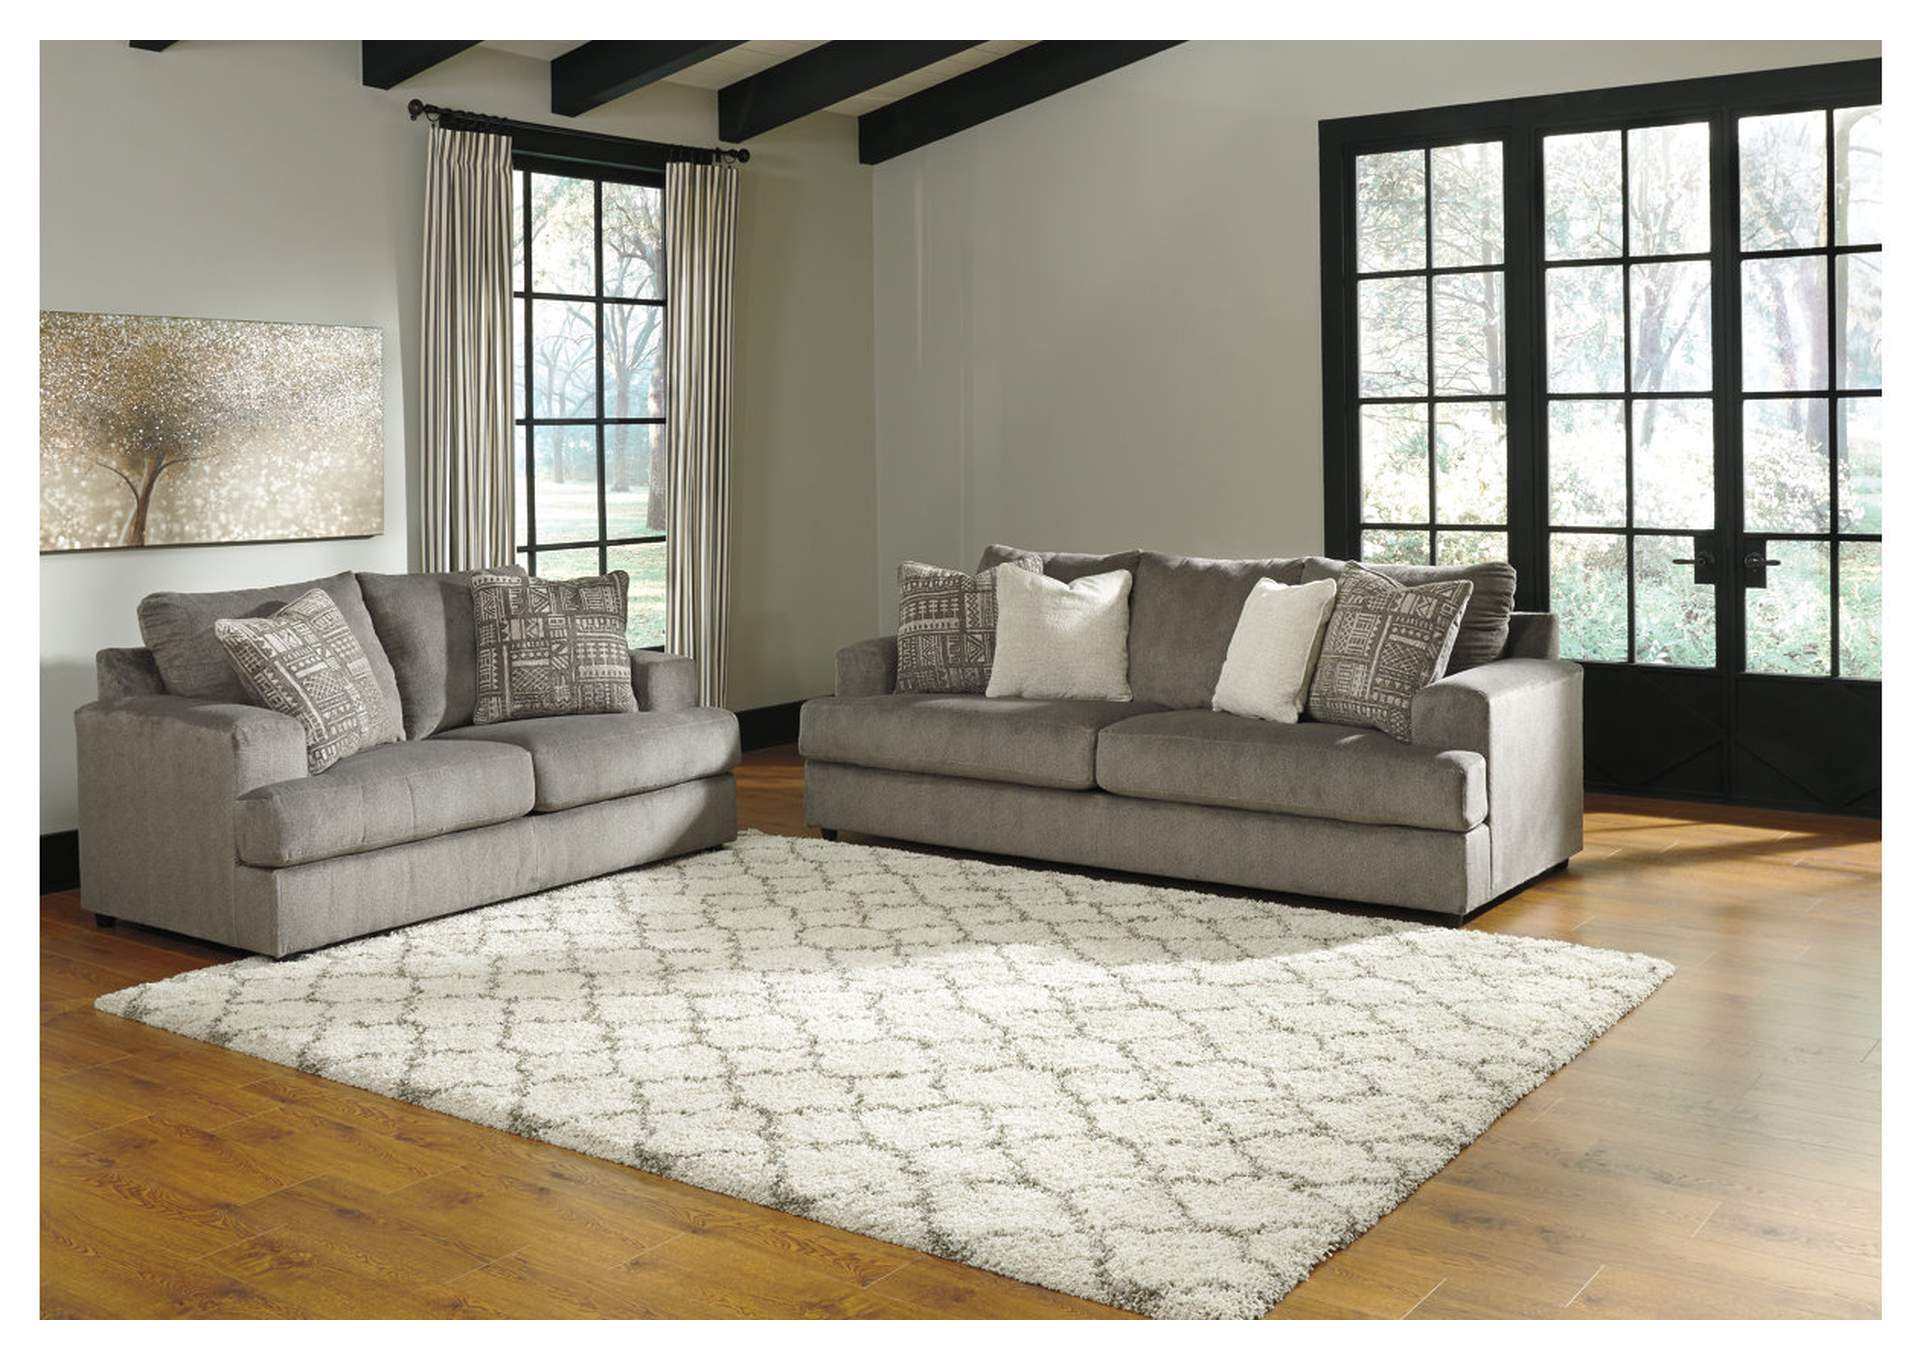 Soletren Sofa and Loveseat,Signature Design By Ashley